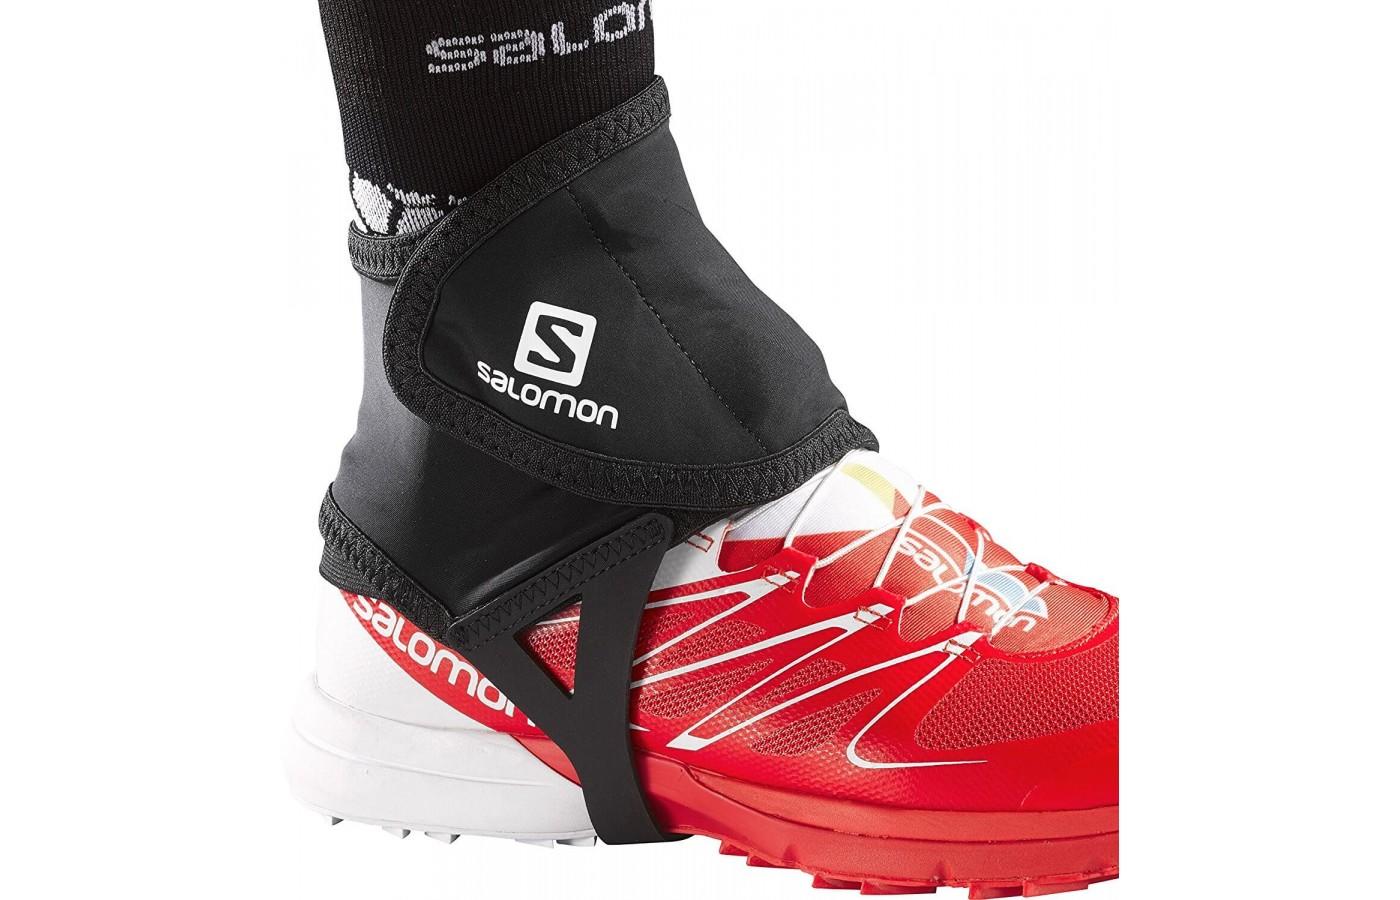 Salomon Low Trail Gaiters are flexible and comfortable for trail runners. 